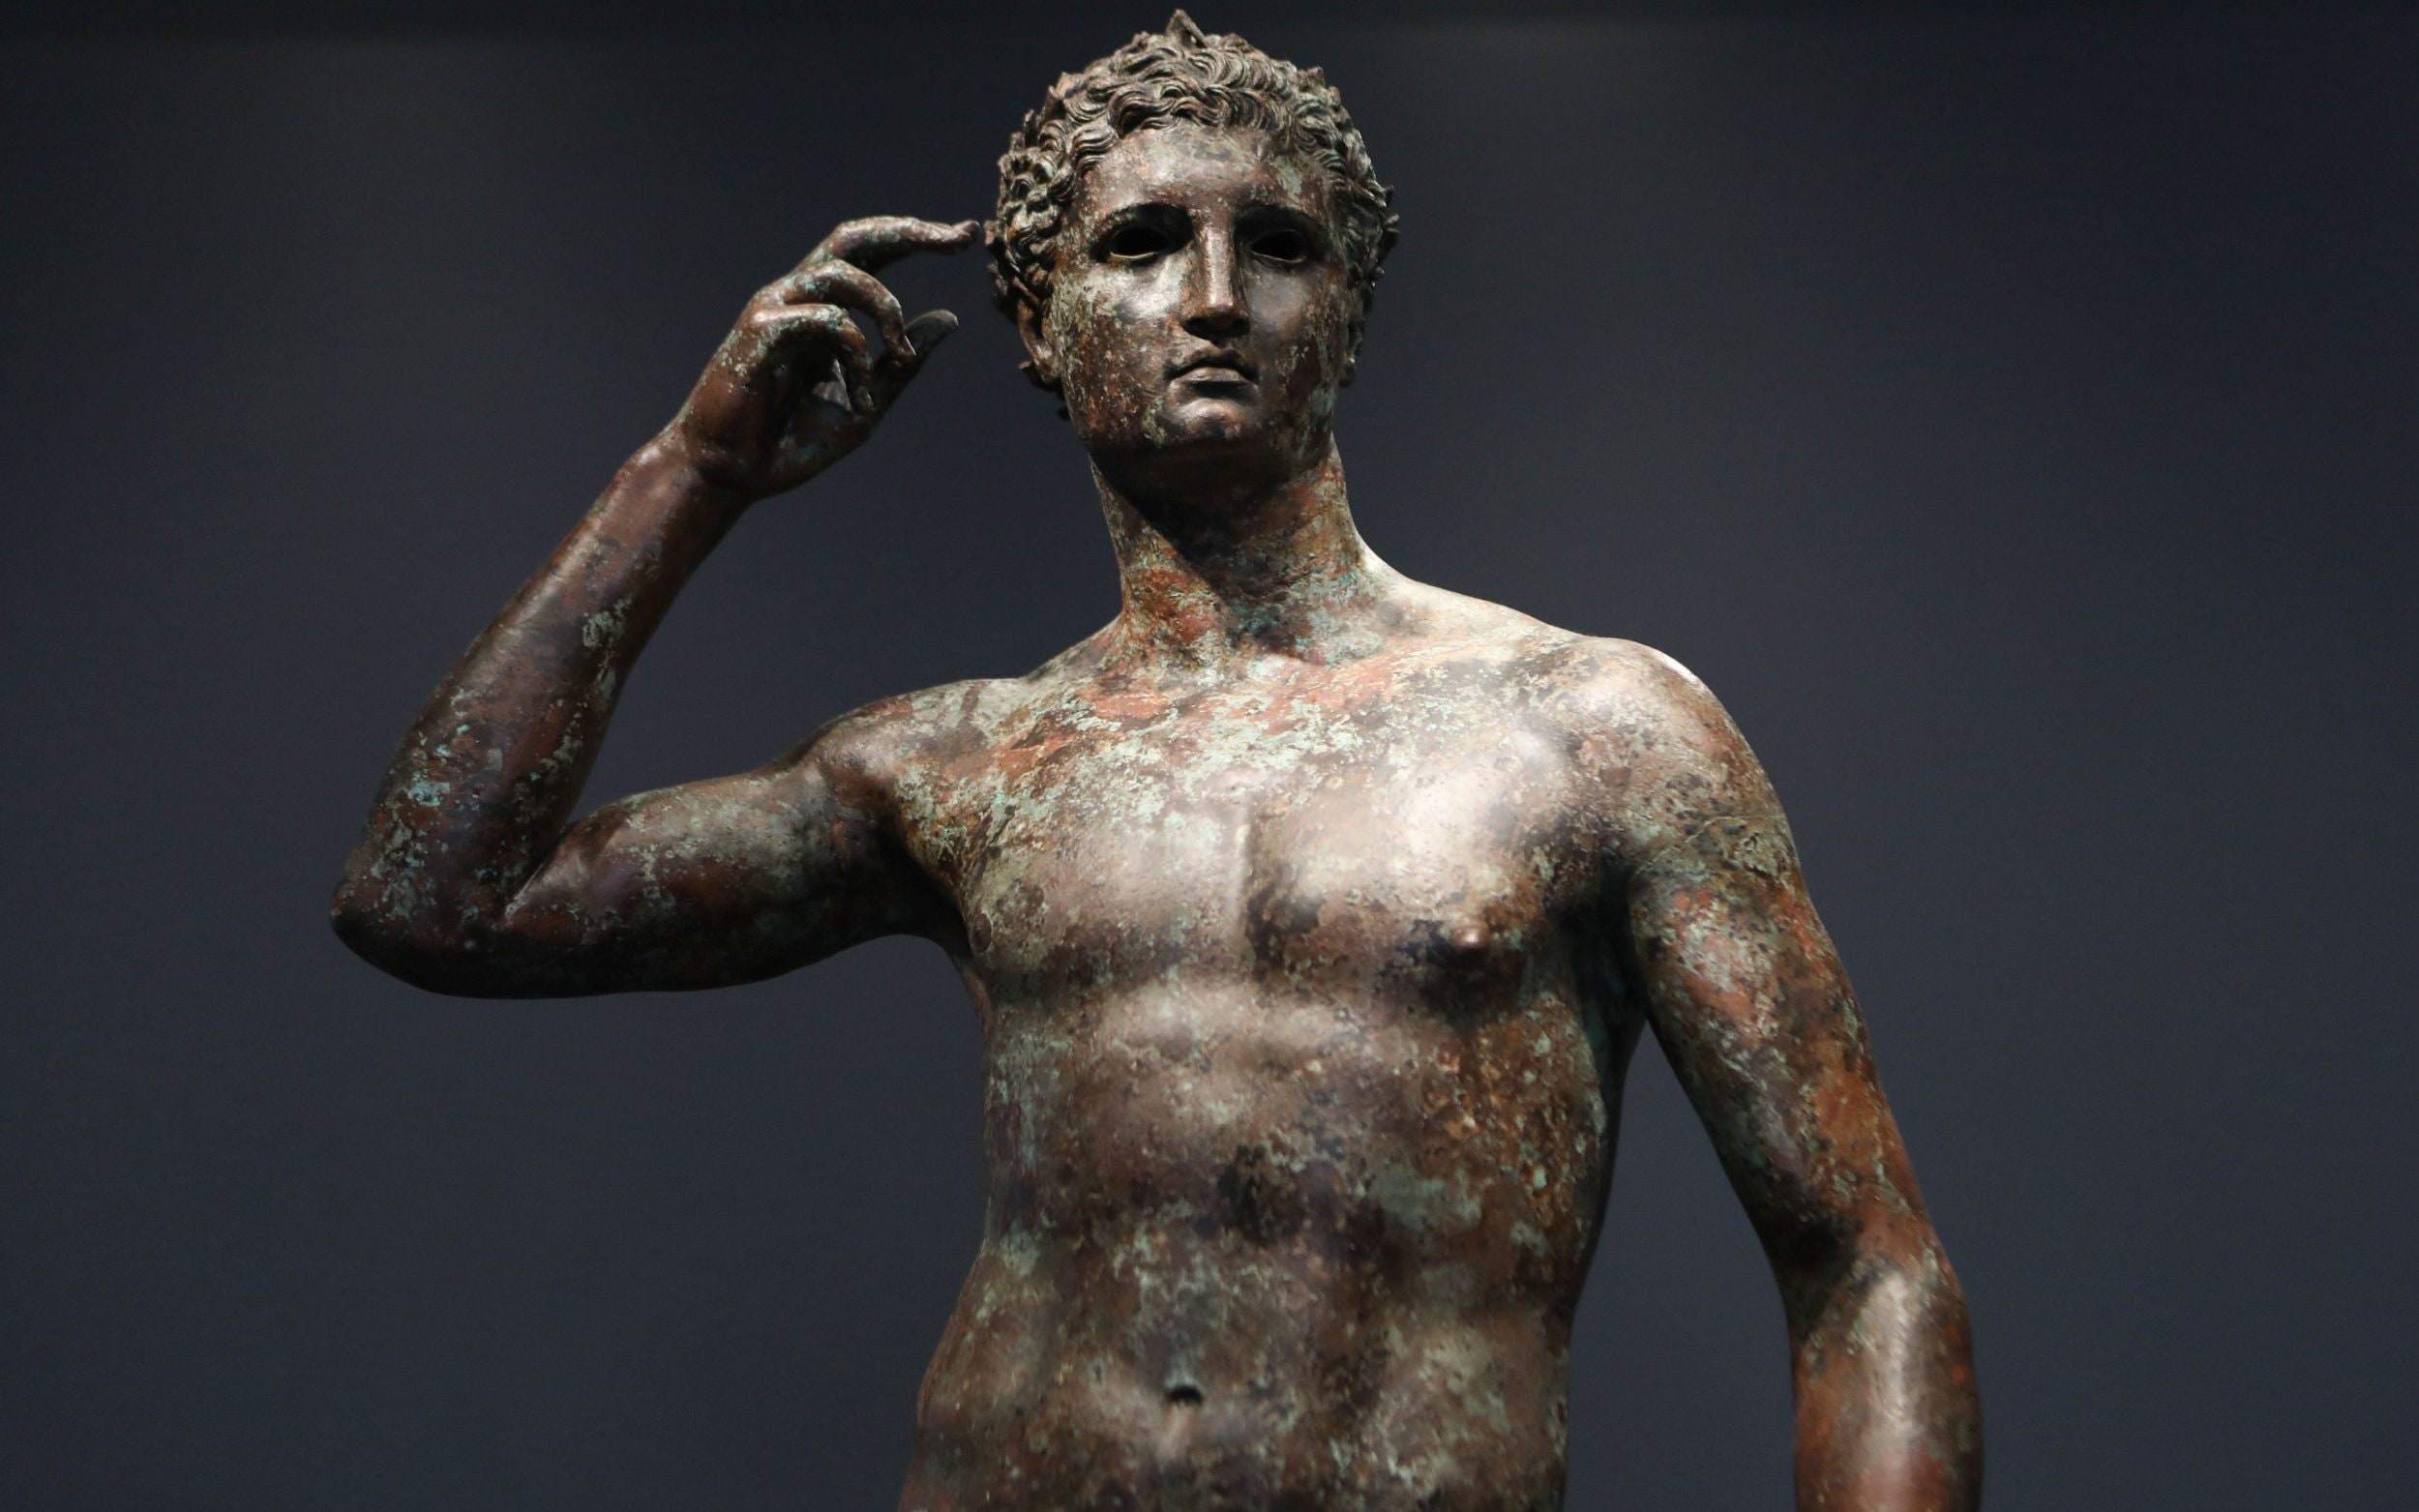 getty bronze must be returned to italy, strasbourg court rules